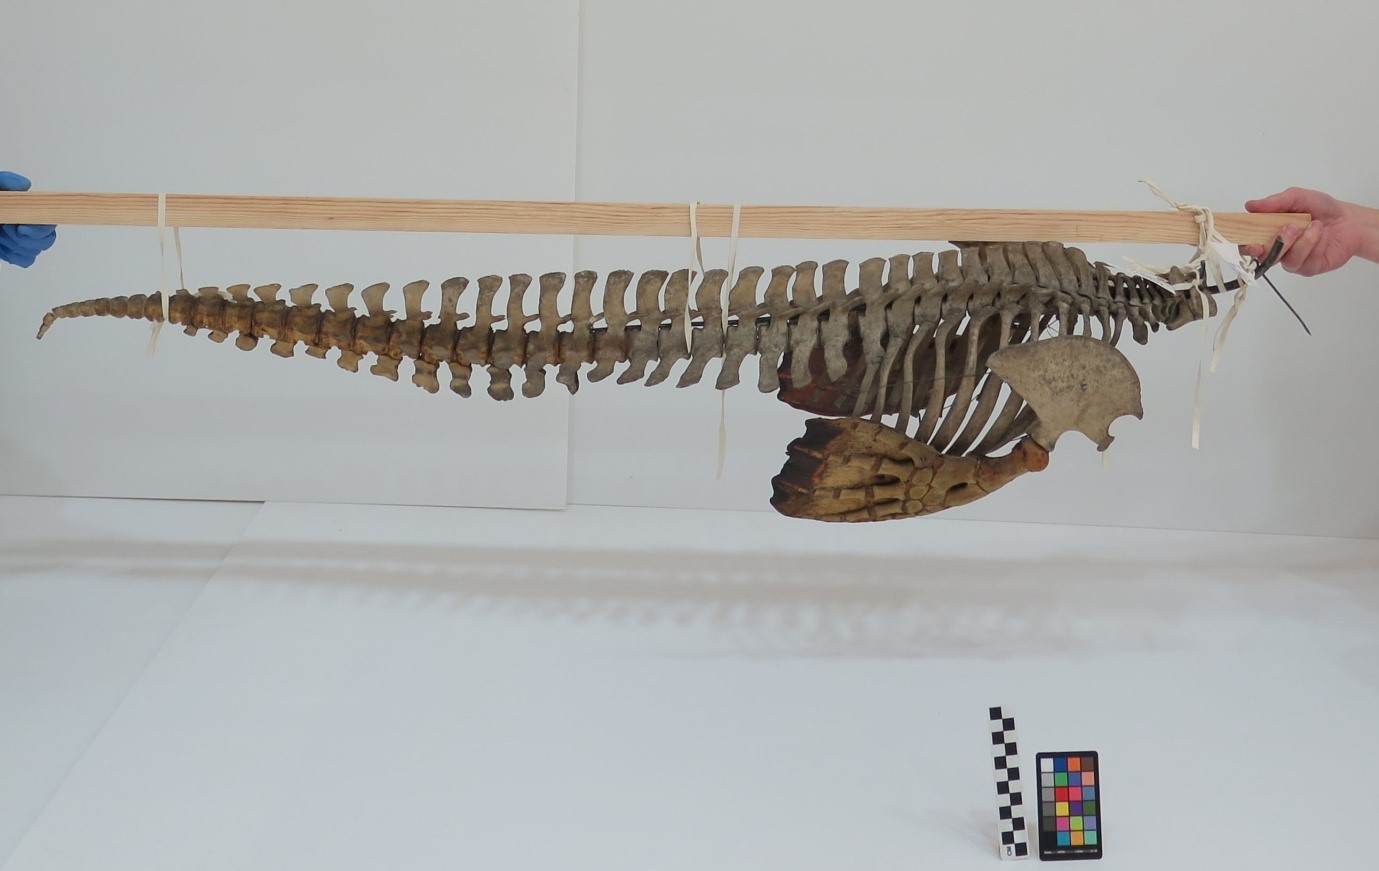 A Short-beaked Common Dolphin (Delphinus delphis) skeleton carefully removed from storage and photographed before treatment and going on public display. Oils leaching from the bones have discoloured the tail and pectoral flipper bones yellow. This specimen is unusual as the flesh around the flipper bones has been preserved along with the skeleton. © University Museum of Zoology Cambridge